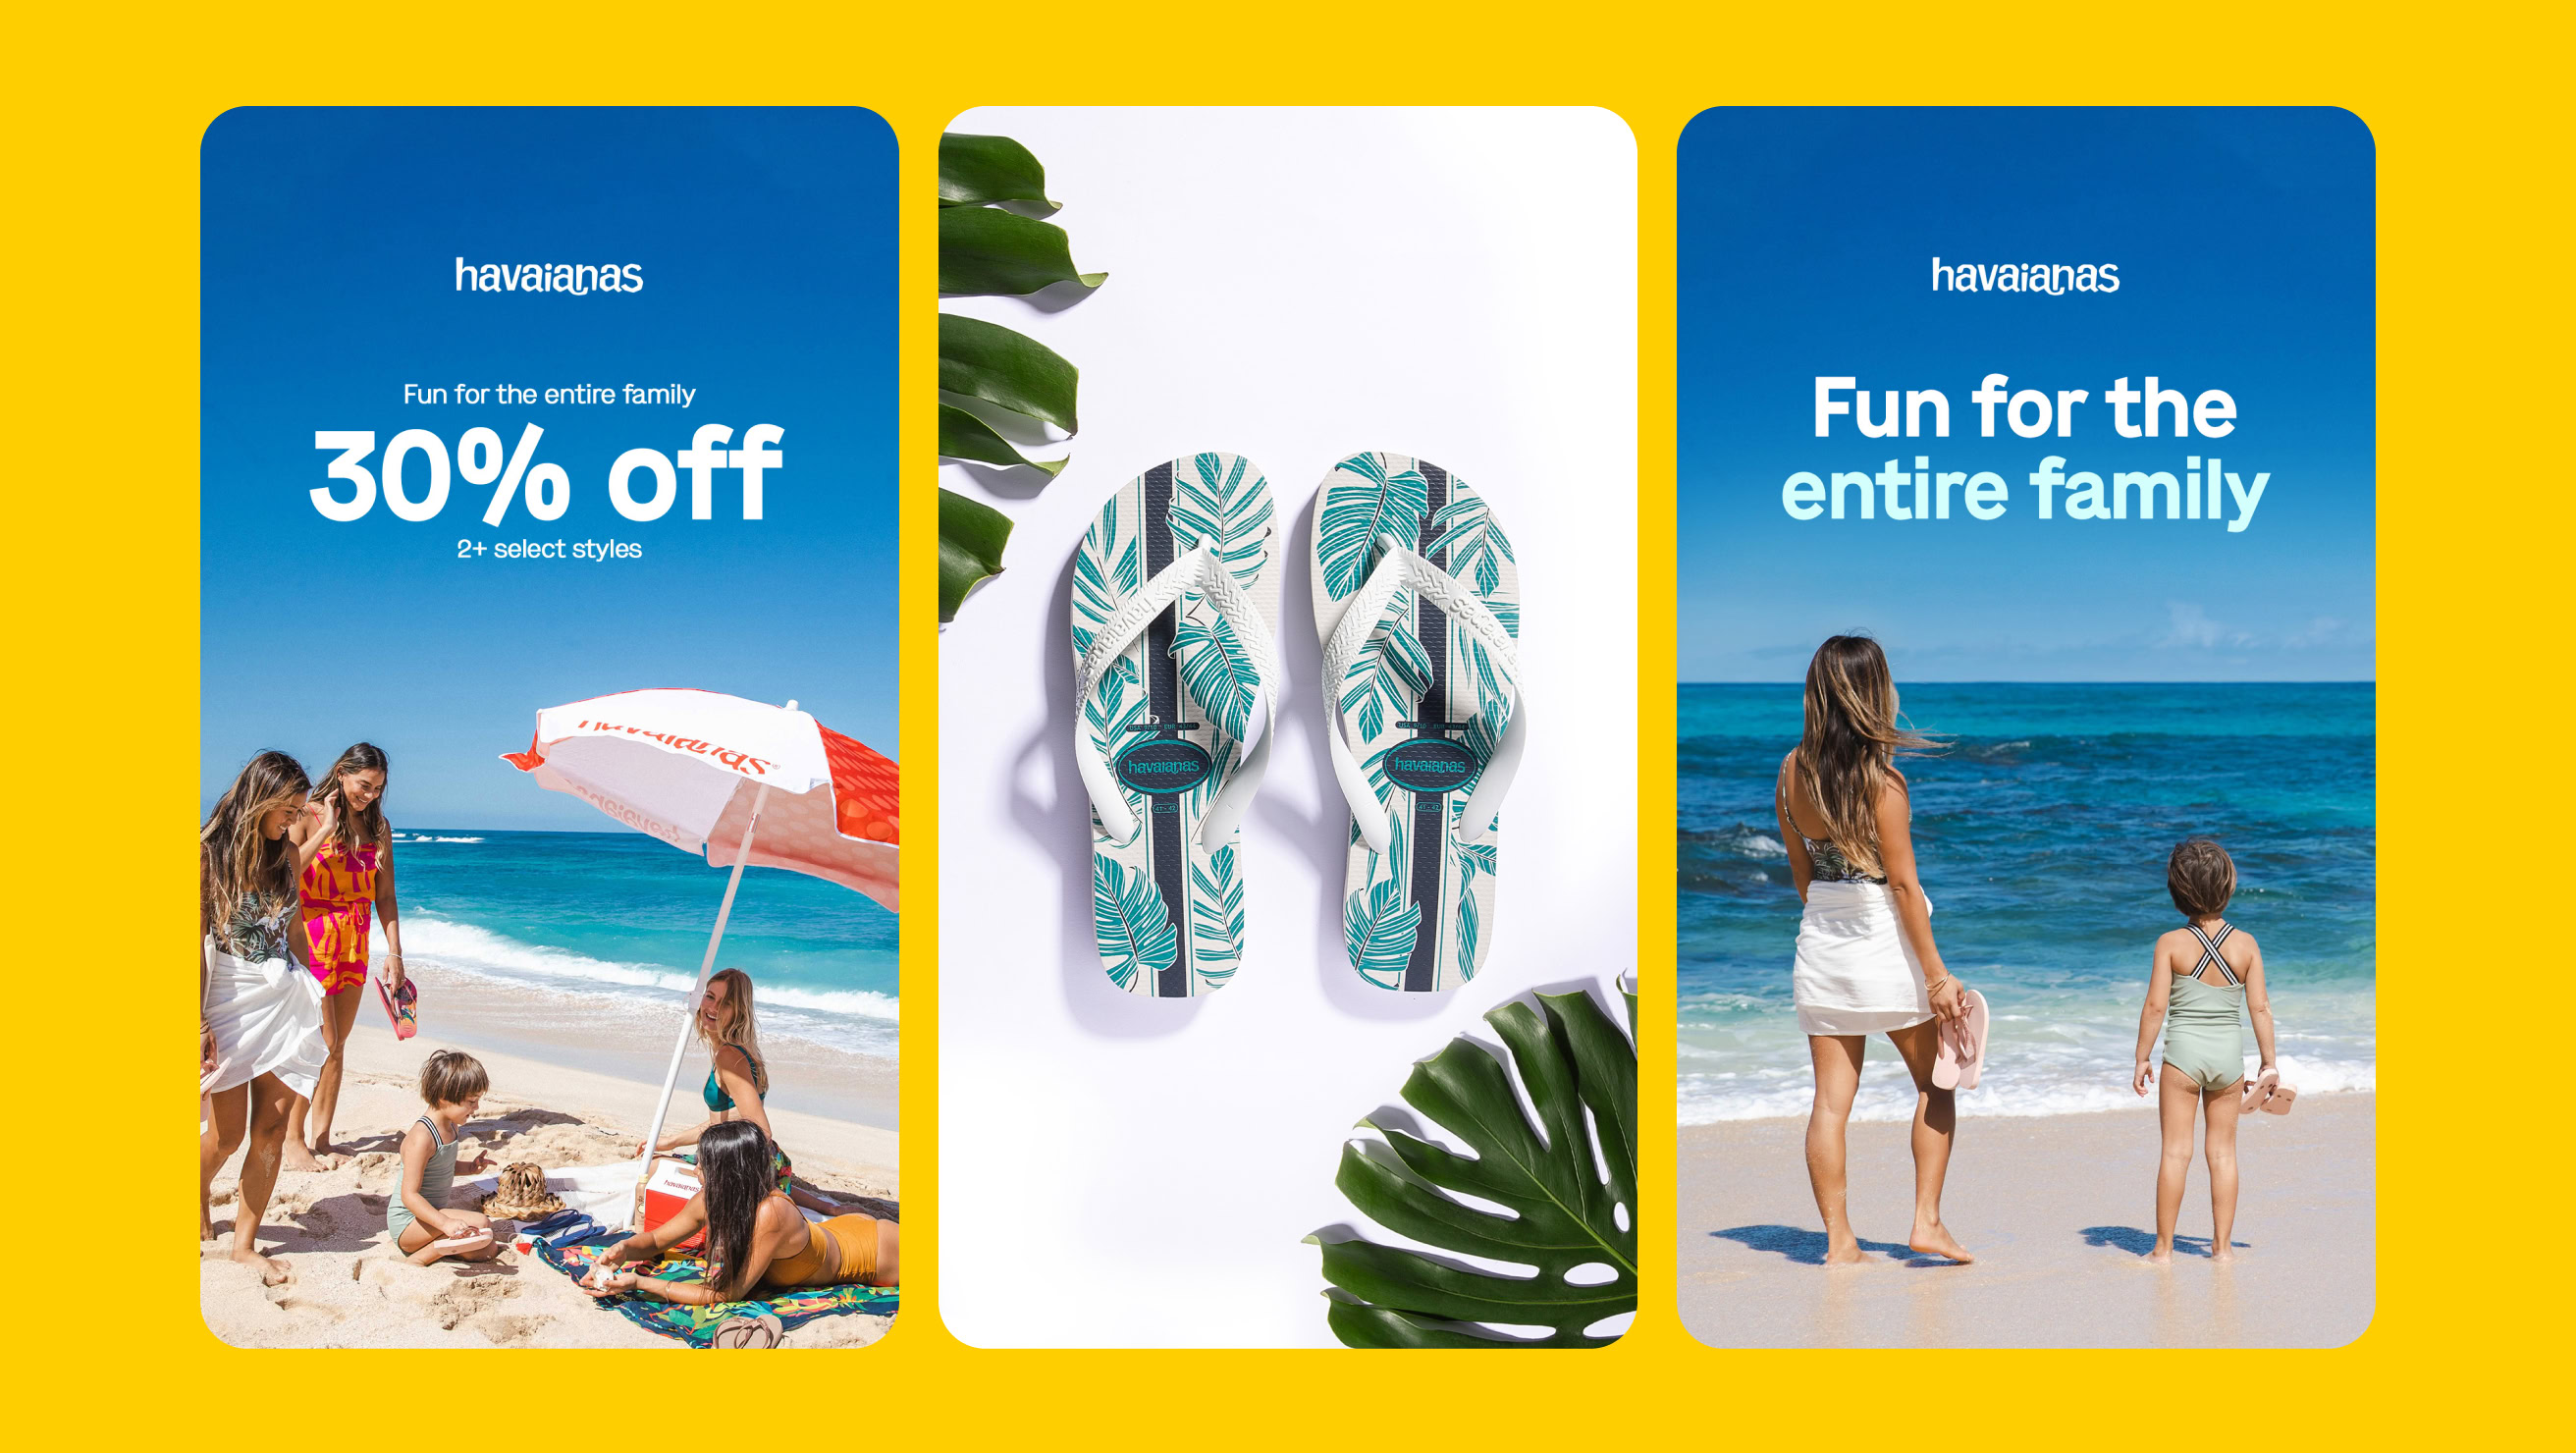 Three-panel promotional image for Havaianas sandals featuring a beach scene with a family, a close-up of flip-flops with leaves, and a woman with two children looking at the ocean.